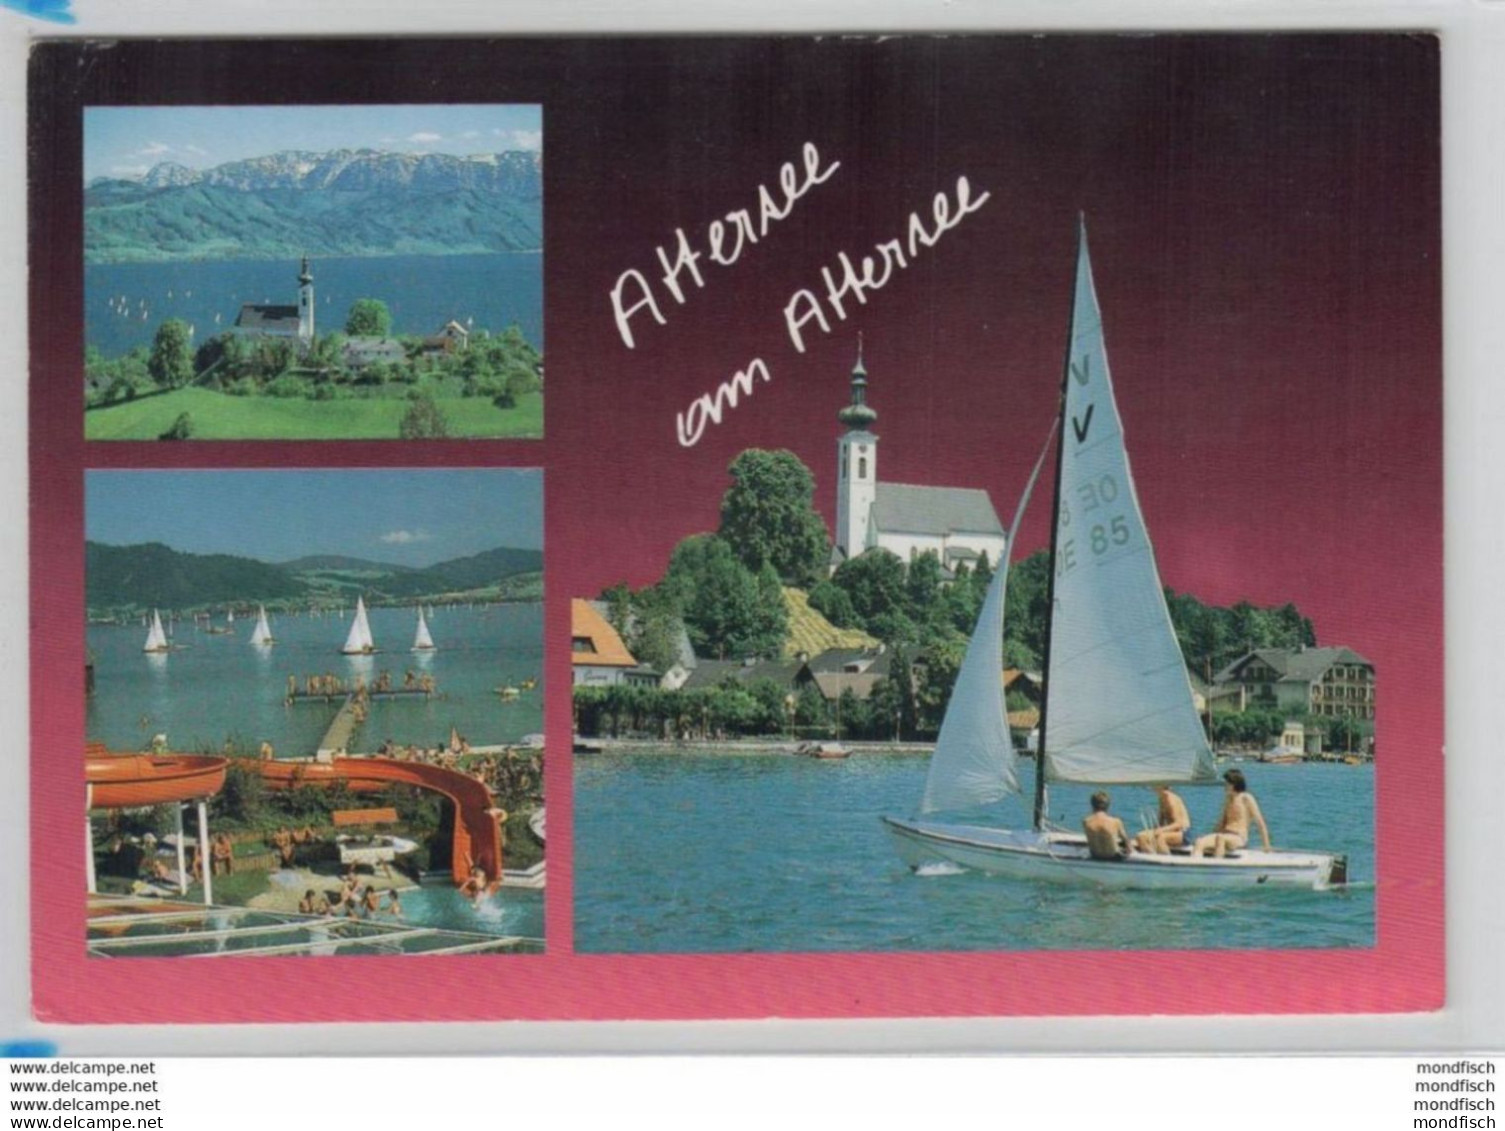 Attersee Am Attersee - Mehrbild - Attersee-Orte